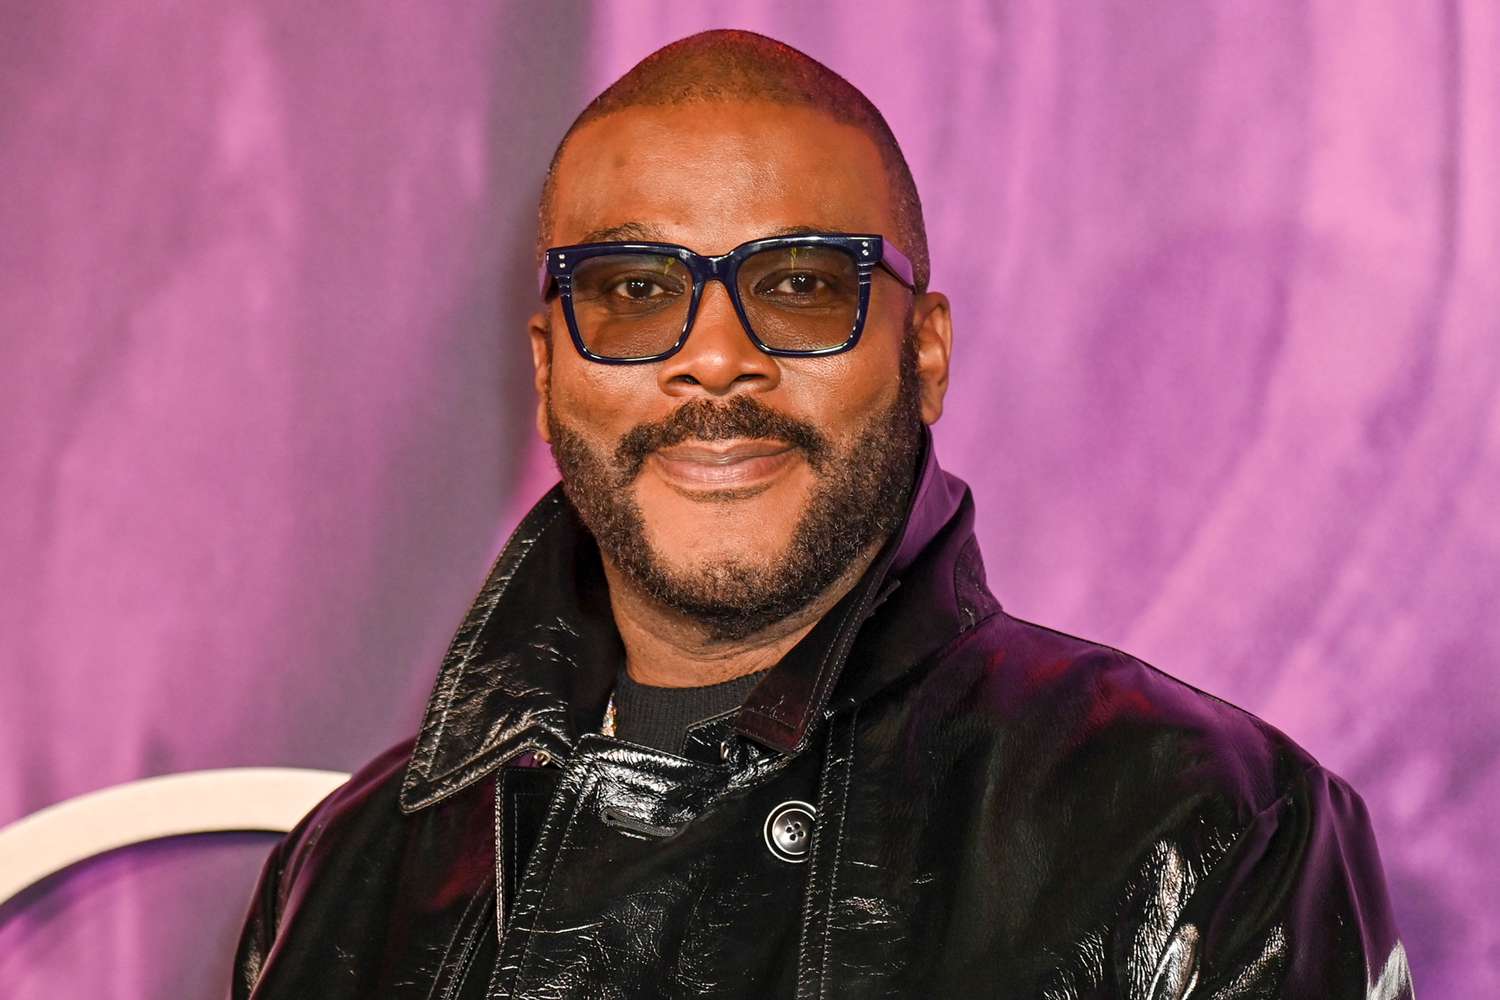 TYLER PERRY ‘HIGHBROW NEGRO’ CRITIQUES ARE ‘BULL***T!!!’